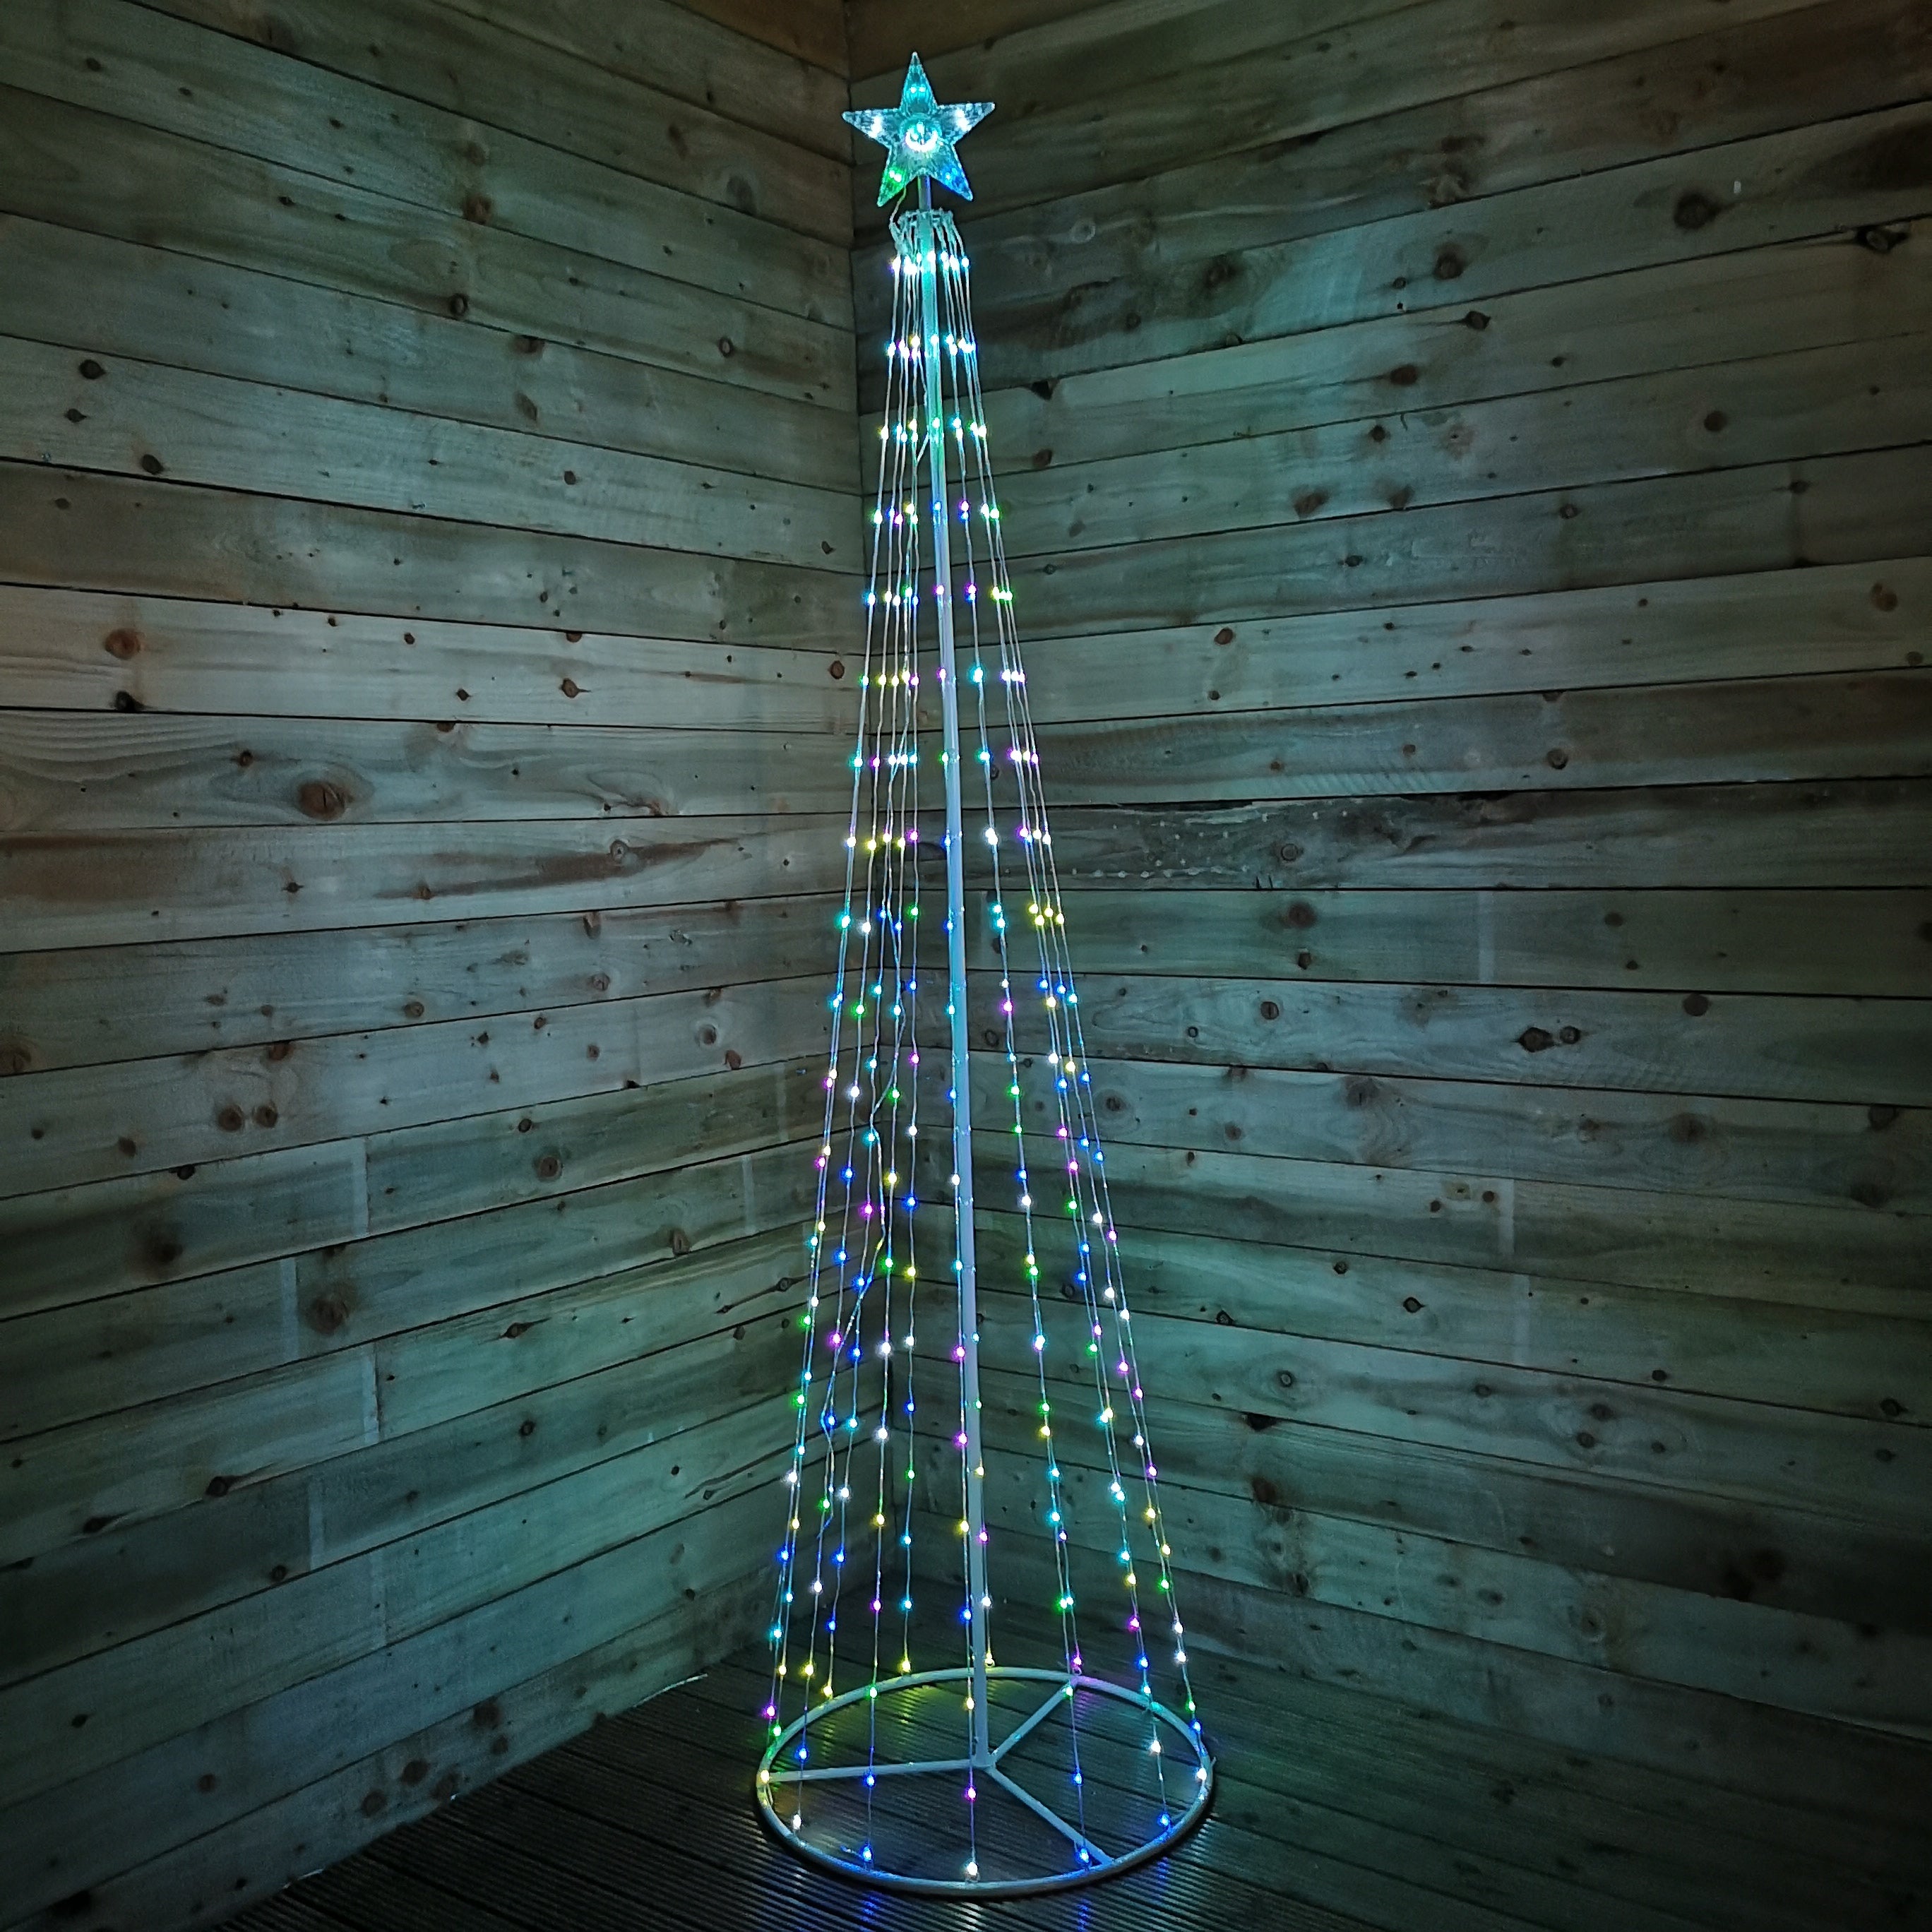 8ft (2.5m) LED Maypole Christmas Tree with Remote Control in Red, Green and Blue